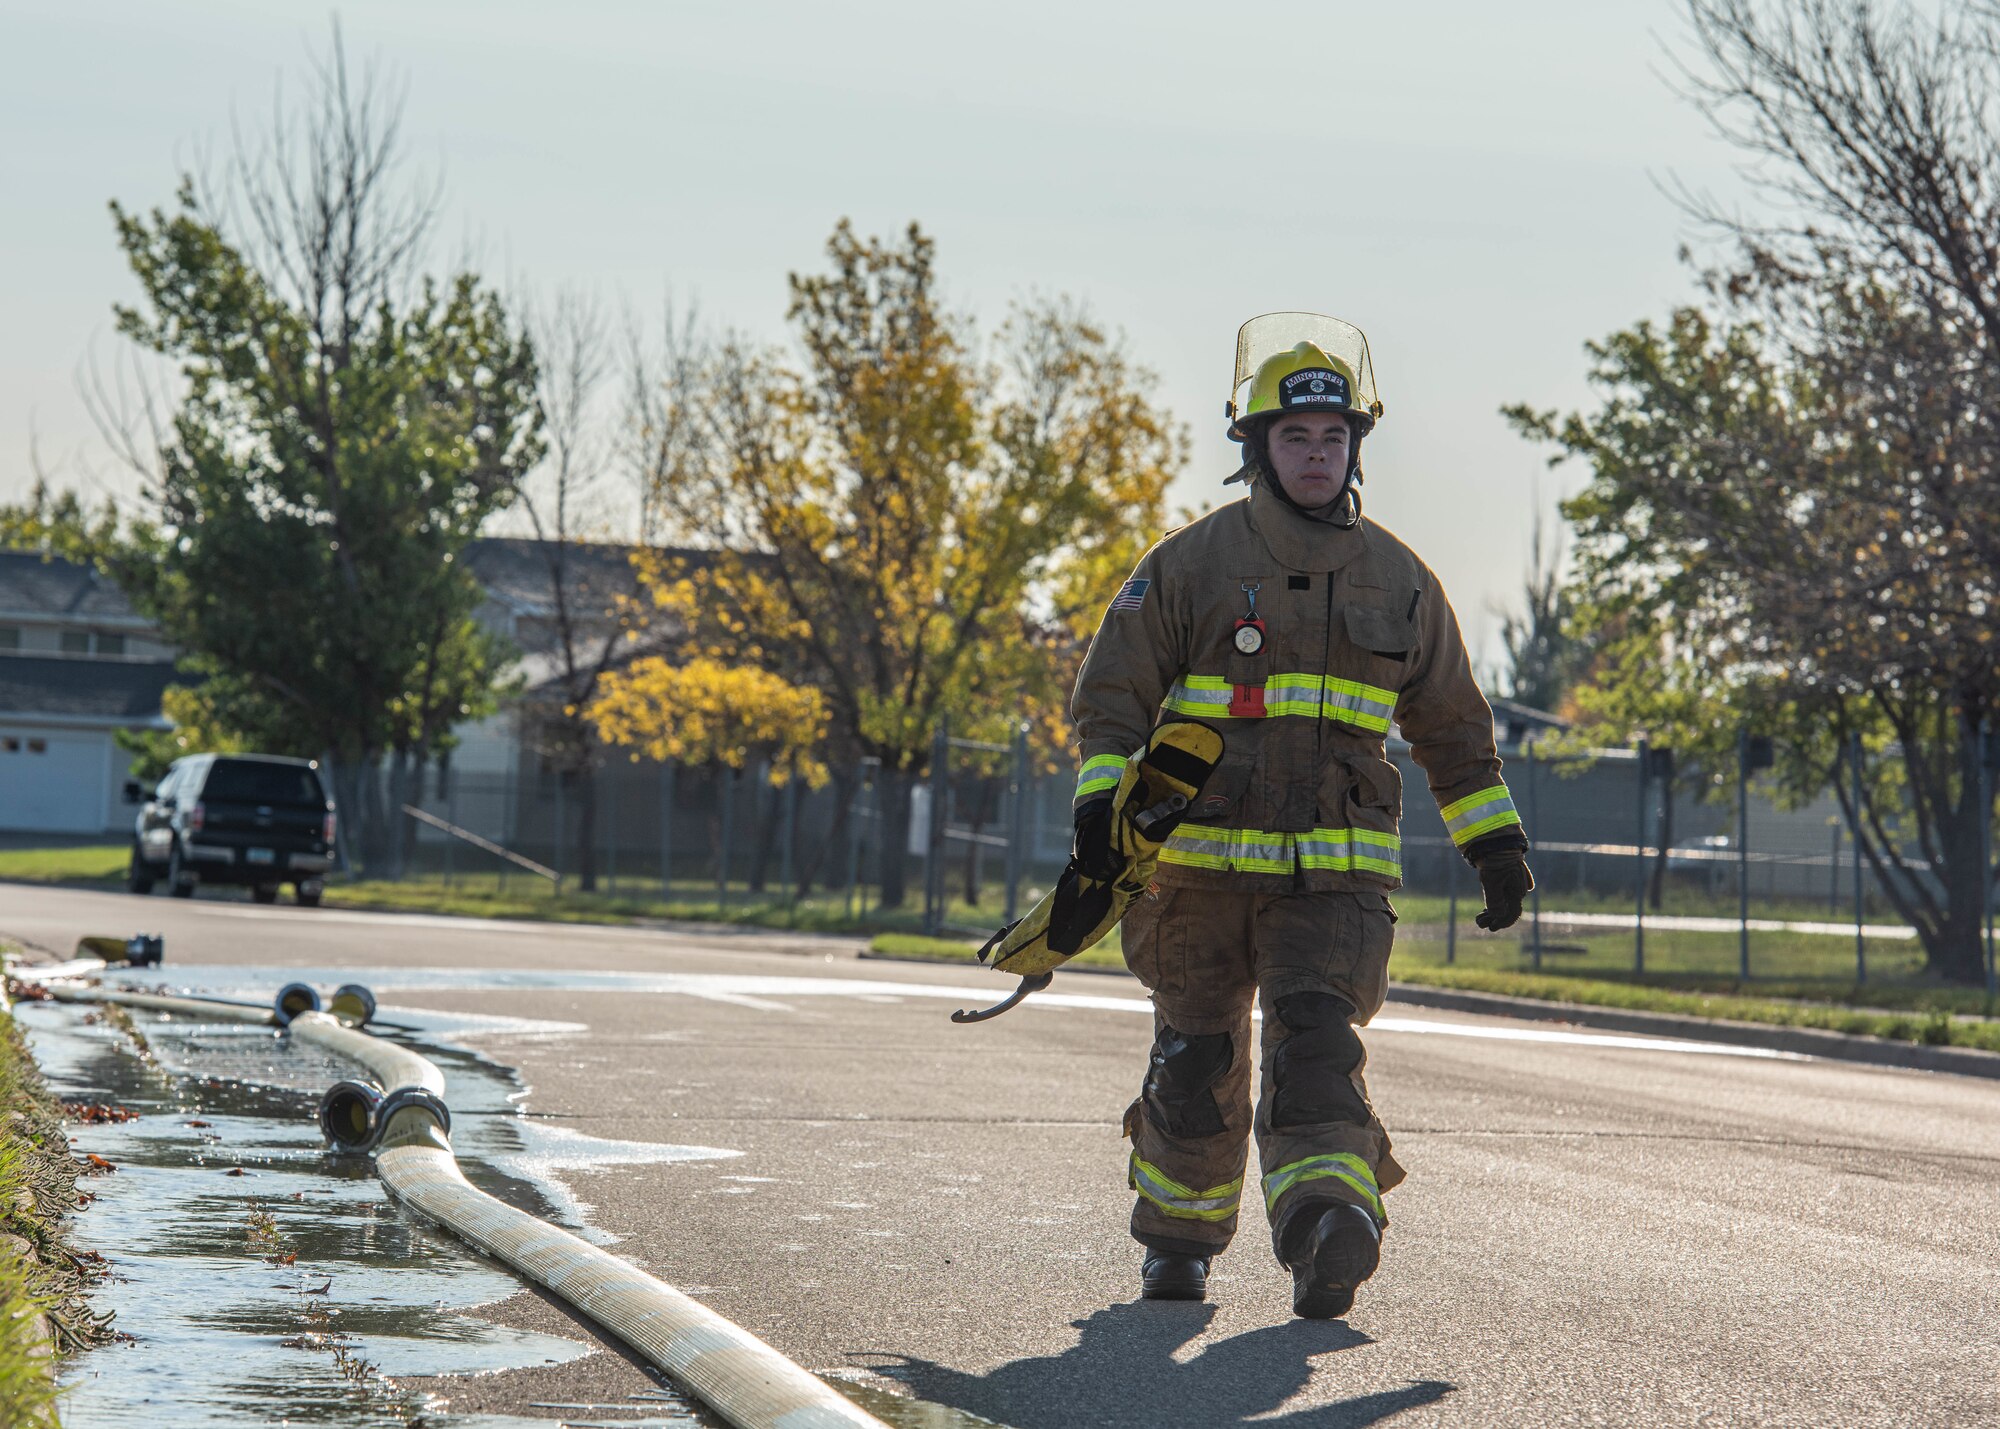 Airman 1st Class Alberto Alvarez, 5th Civil Engineer Squadron firefighter, carries equipment after a National Fire Prevention Association (NFPA) 1410 drill at Minot Air Force Base, North Dakota, Oct. 4, 2023. During the drill, Alvarez was responsible for connecting the fire hose to a fire hydrant and ensuring it was functioning properly. (U.S. Air Force photo by Airman 1st Class Kyle Wilson)